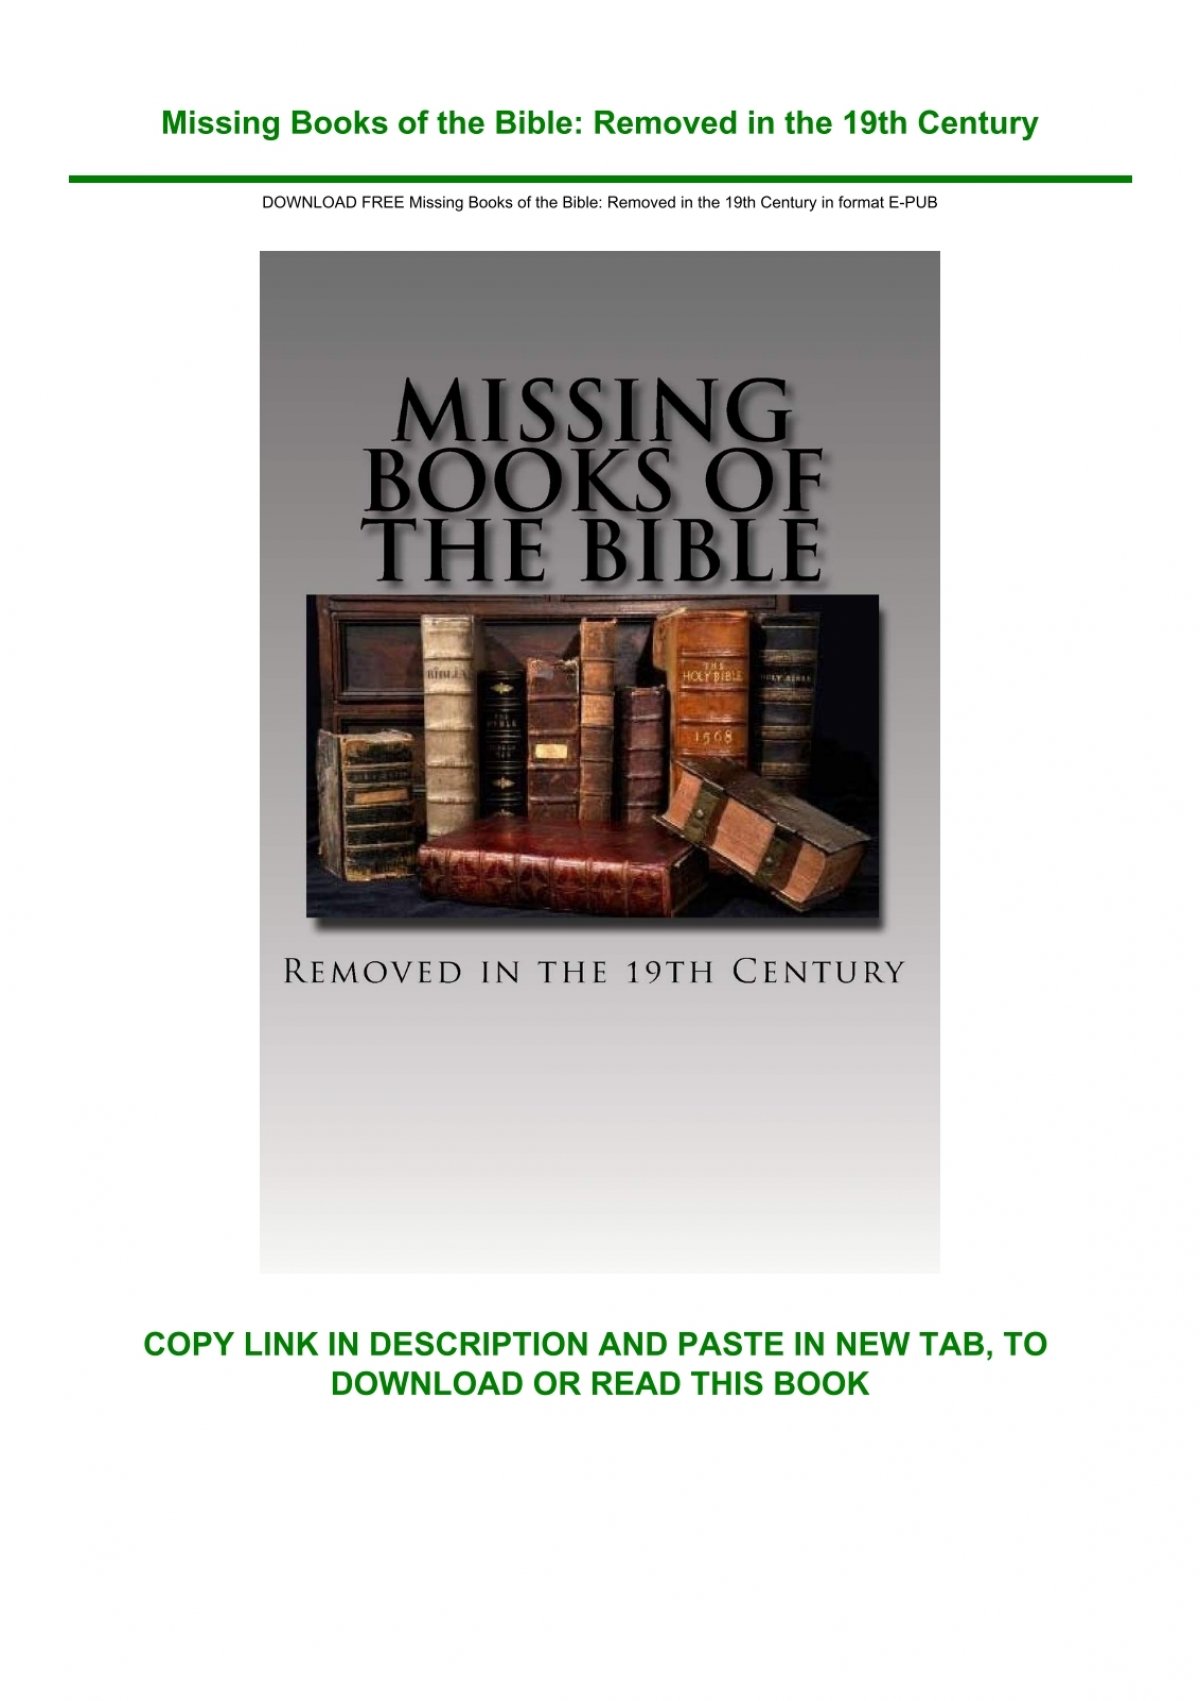 download-free-missing-books-of-the-bible-removed-in-the-19th-century-in-format-e-pub